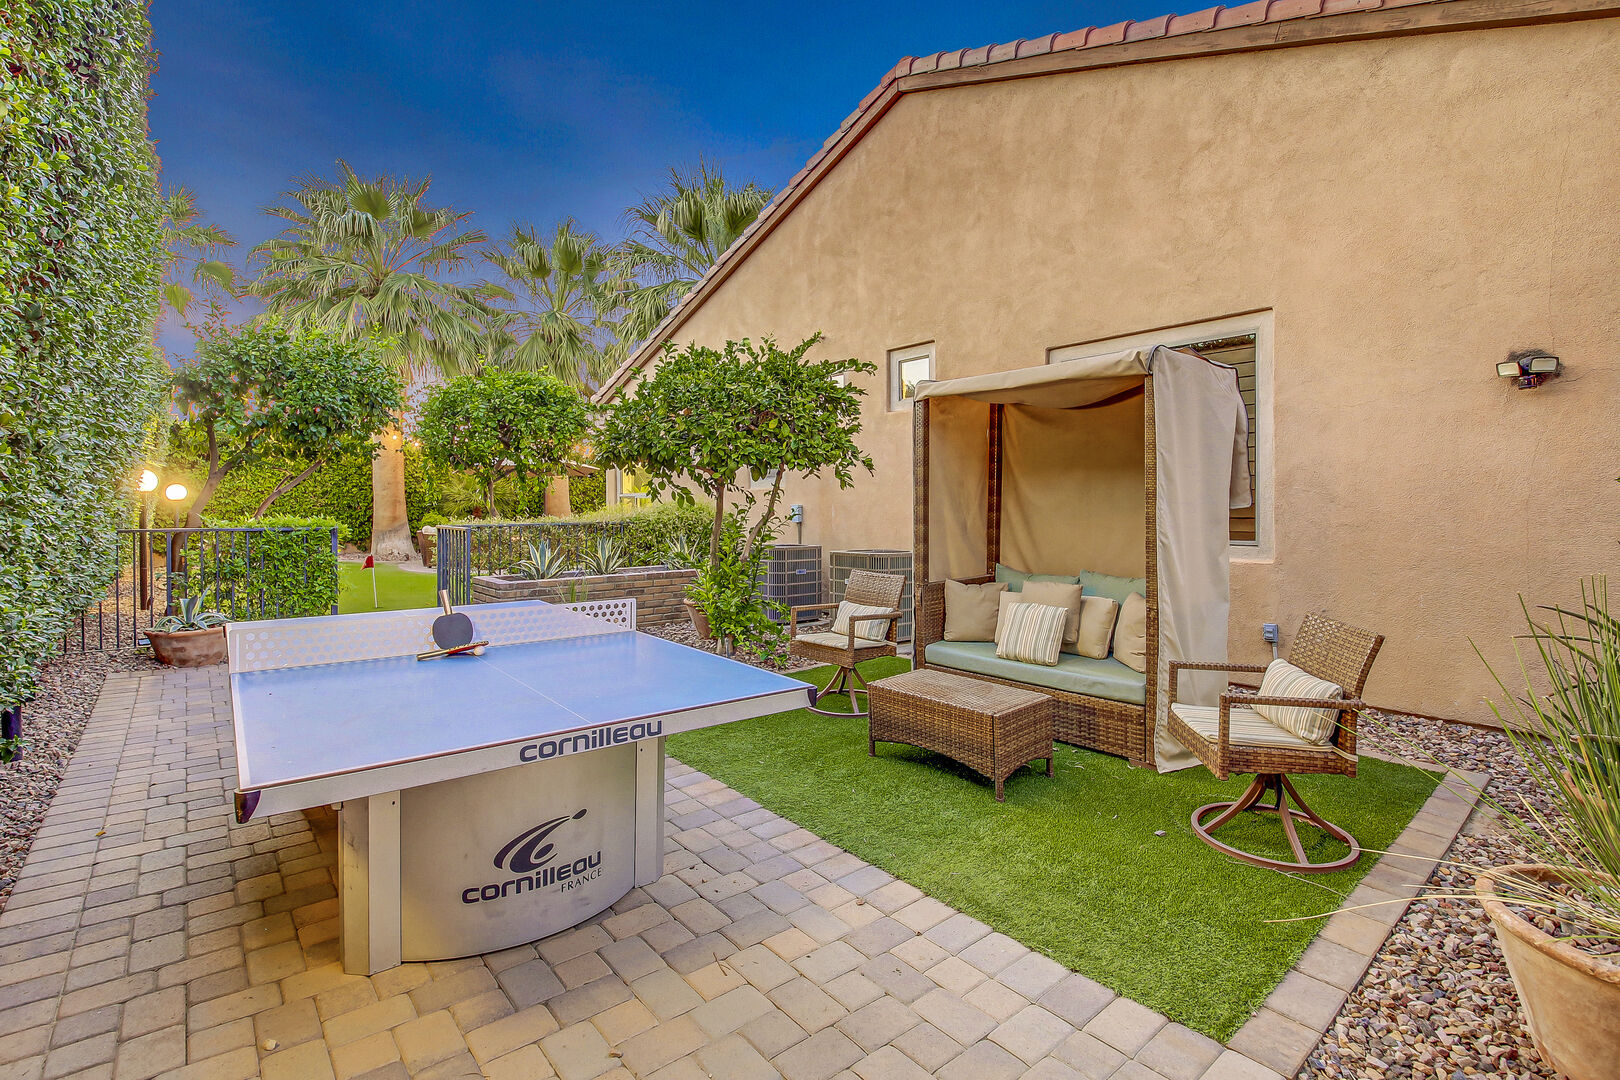 Team up and play a round of Ping-Pong or lounge on the resort style love seat.